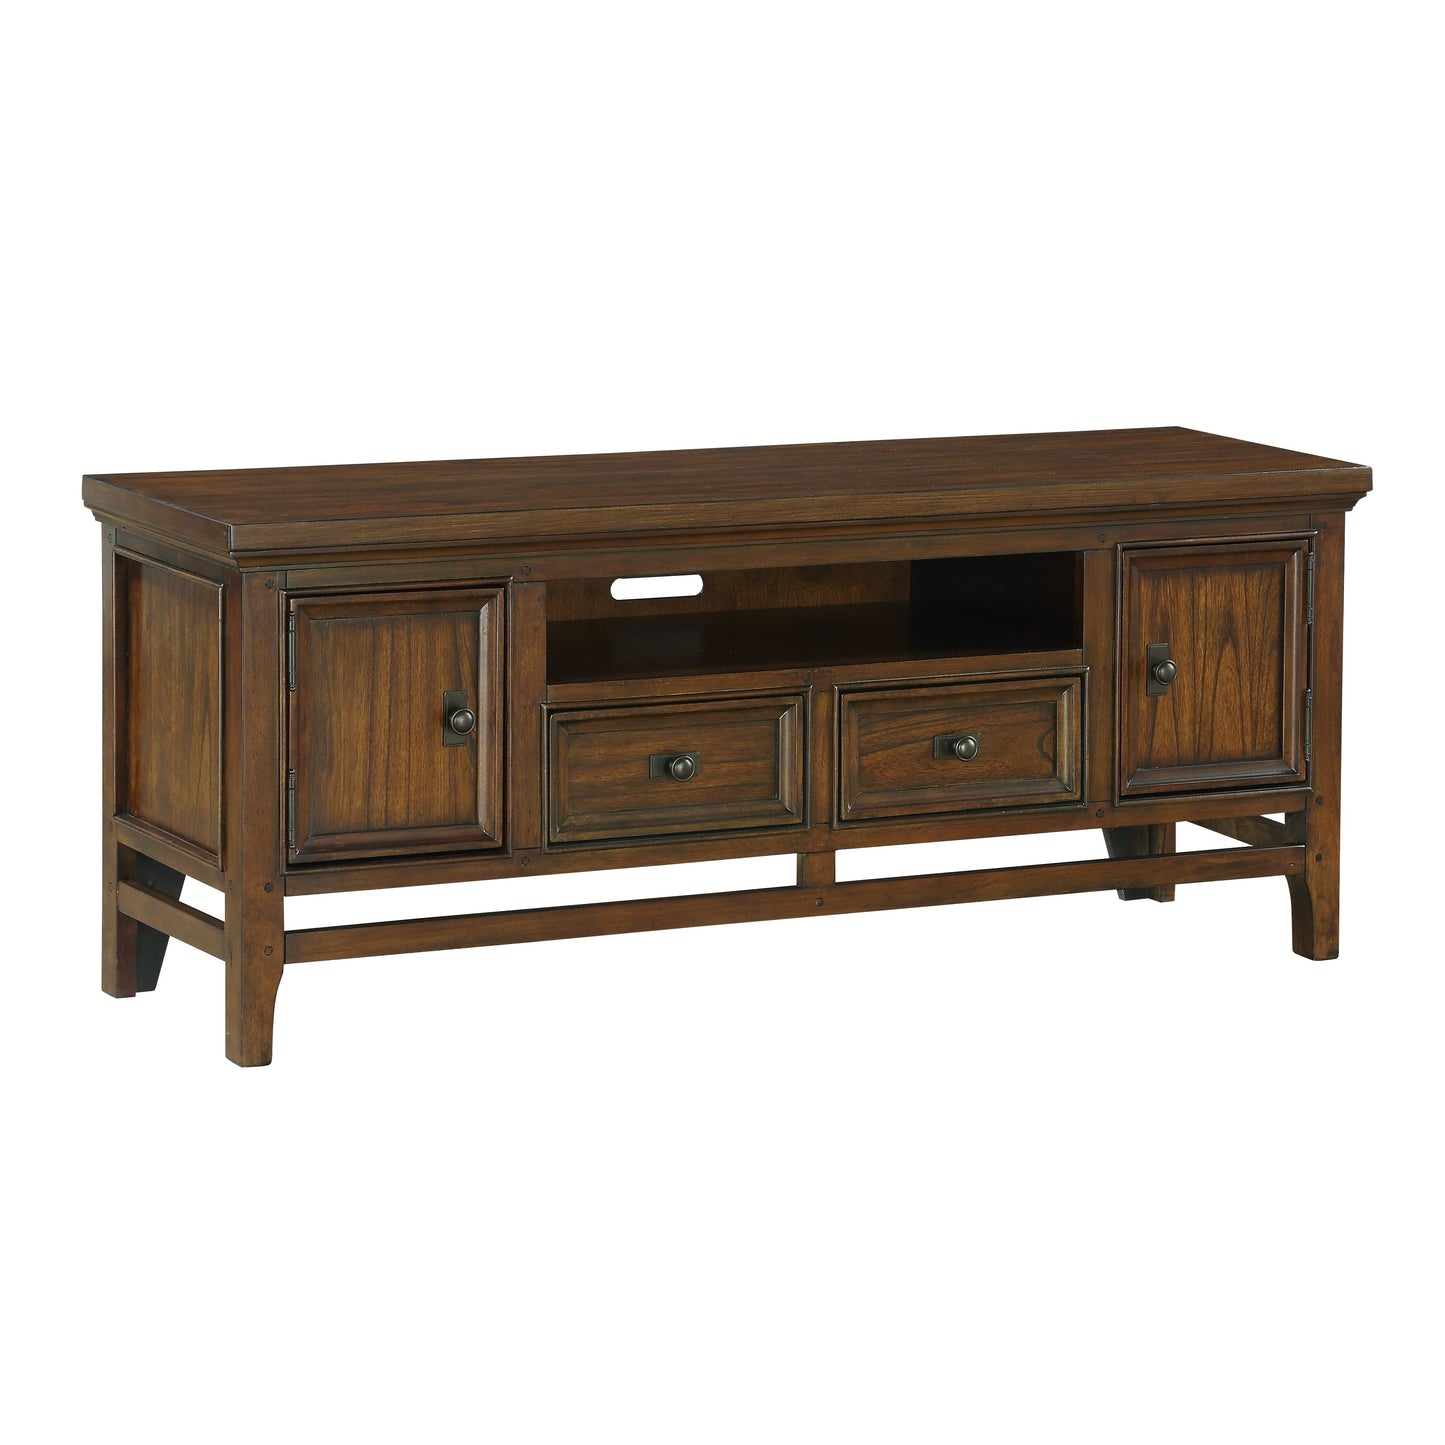 Frazier Park 59" TV Stand BROWN CHERRY ONLY